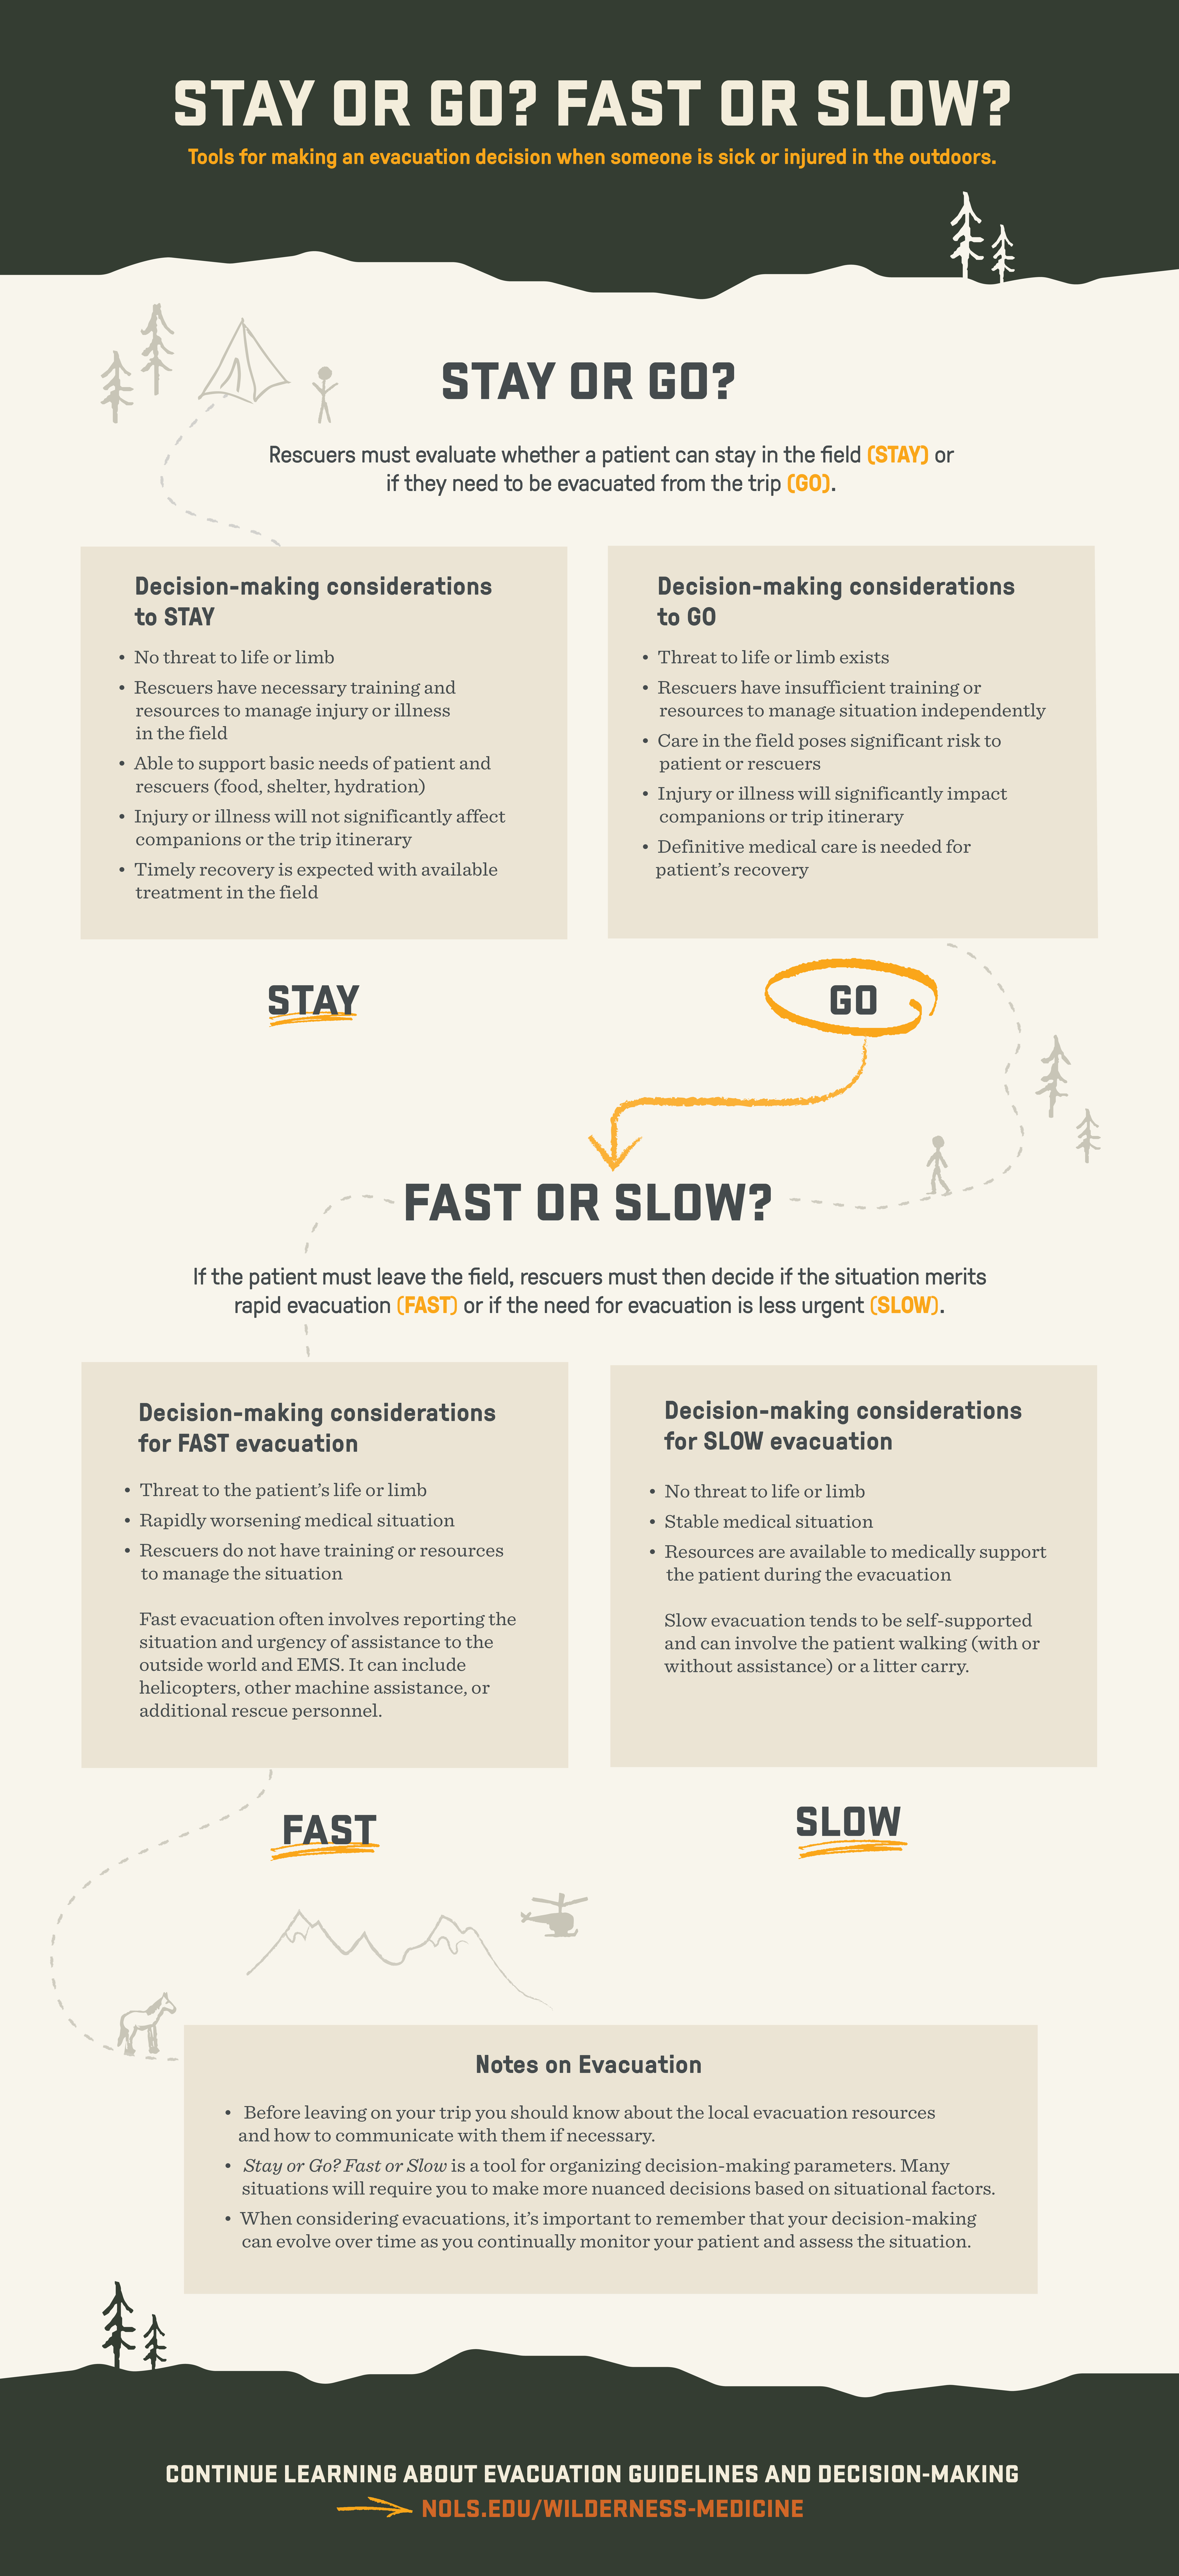 Stay or go? Fast or slow? infographic for making evacuation decisions